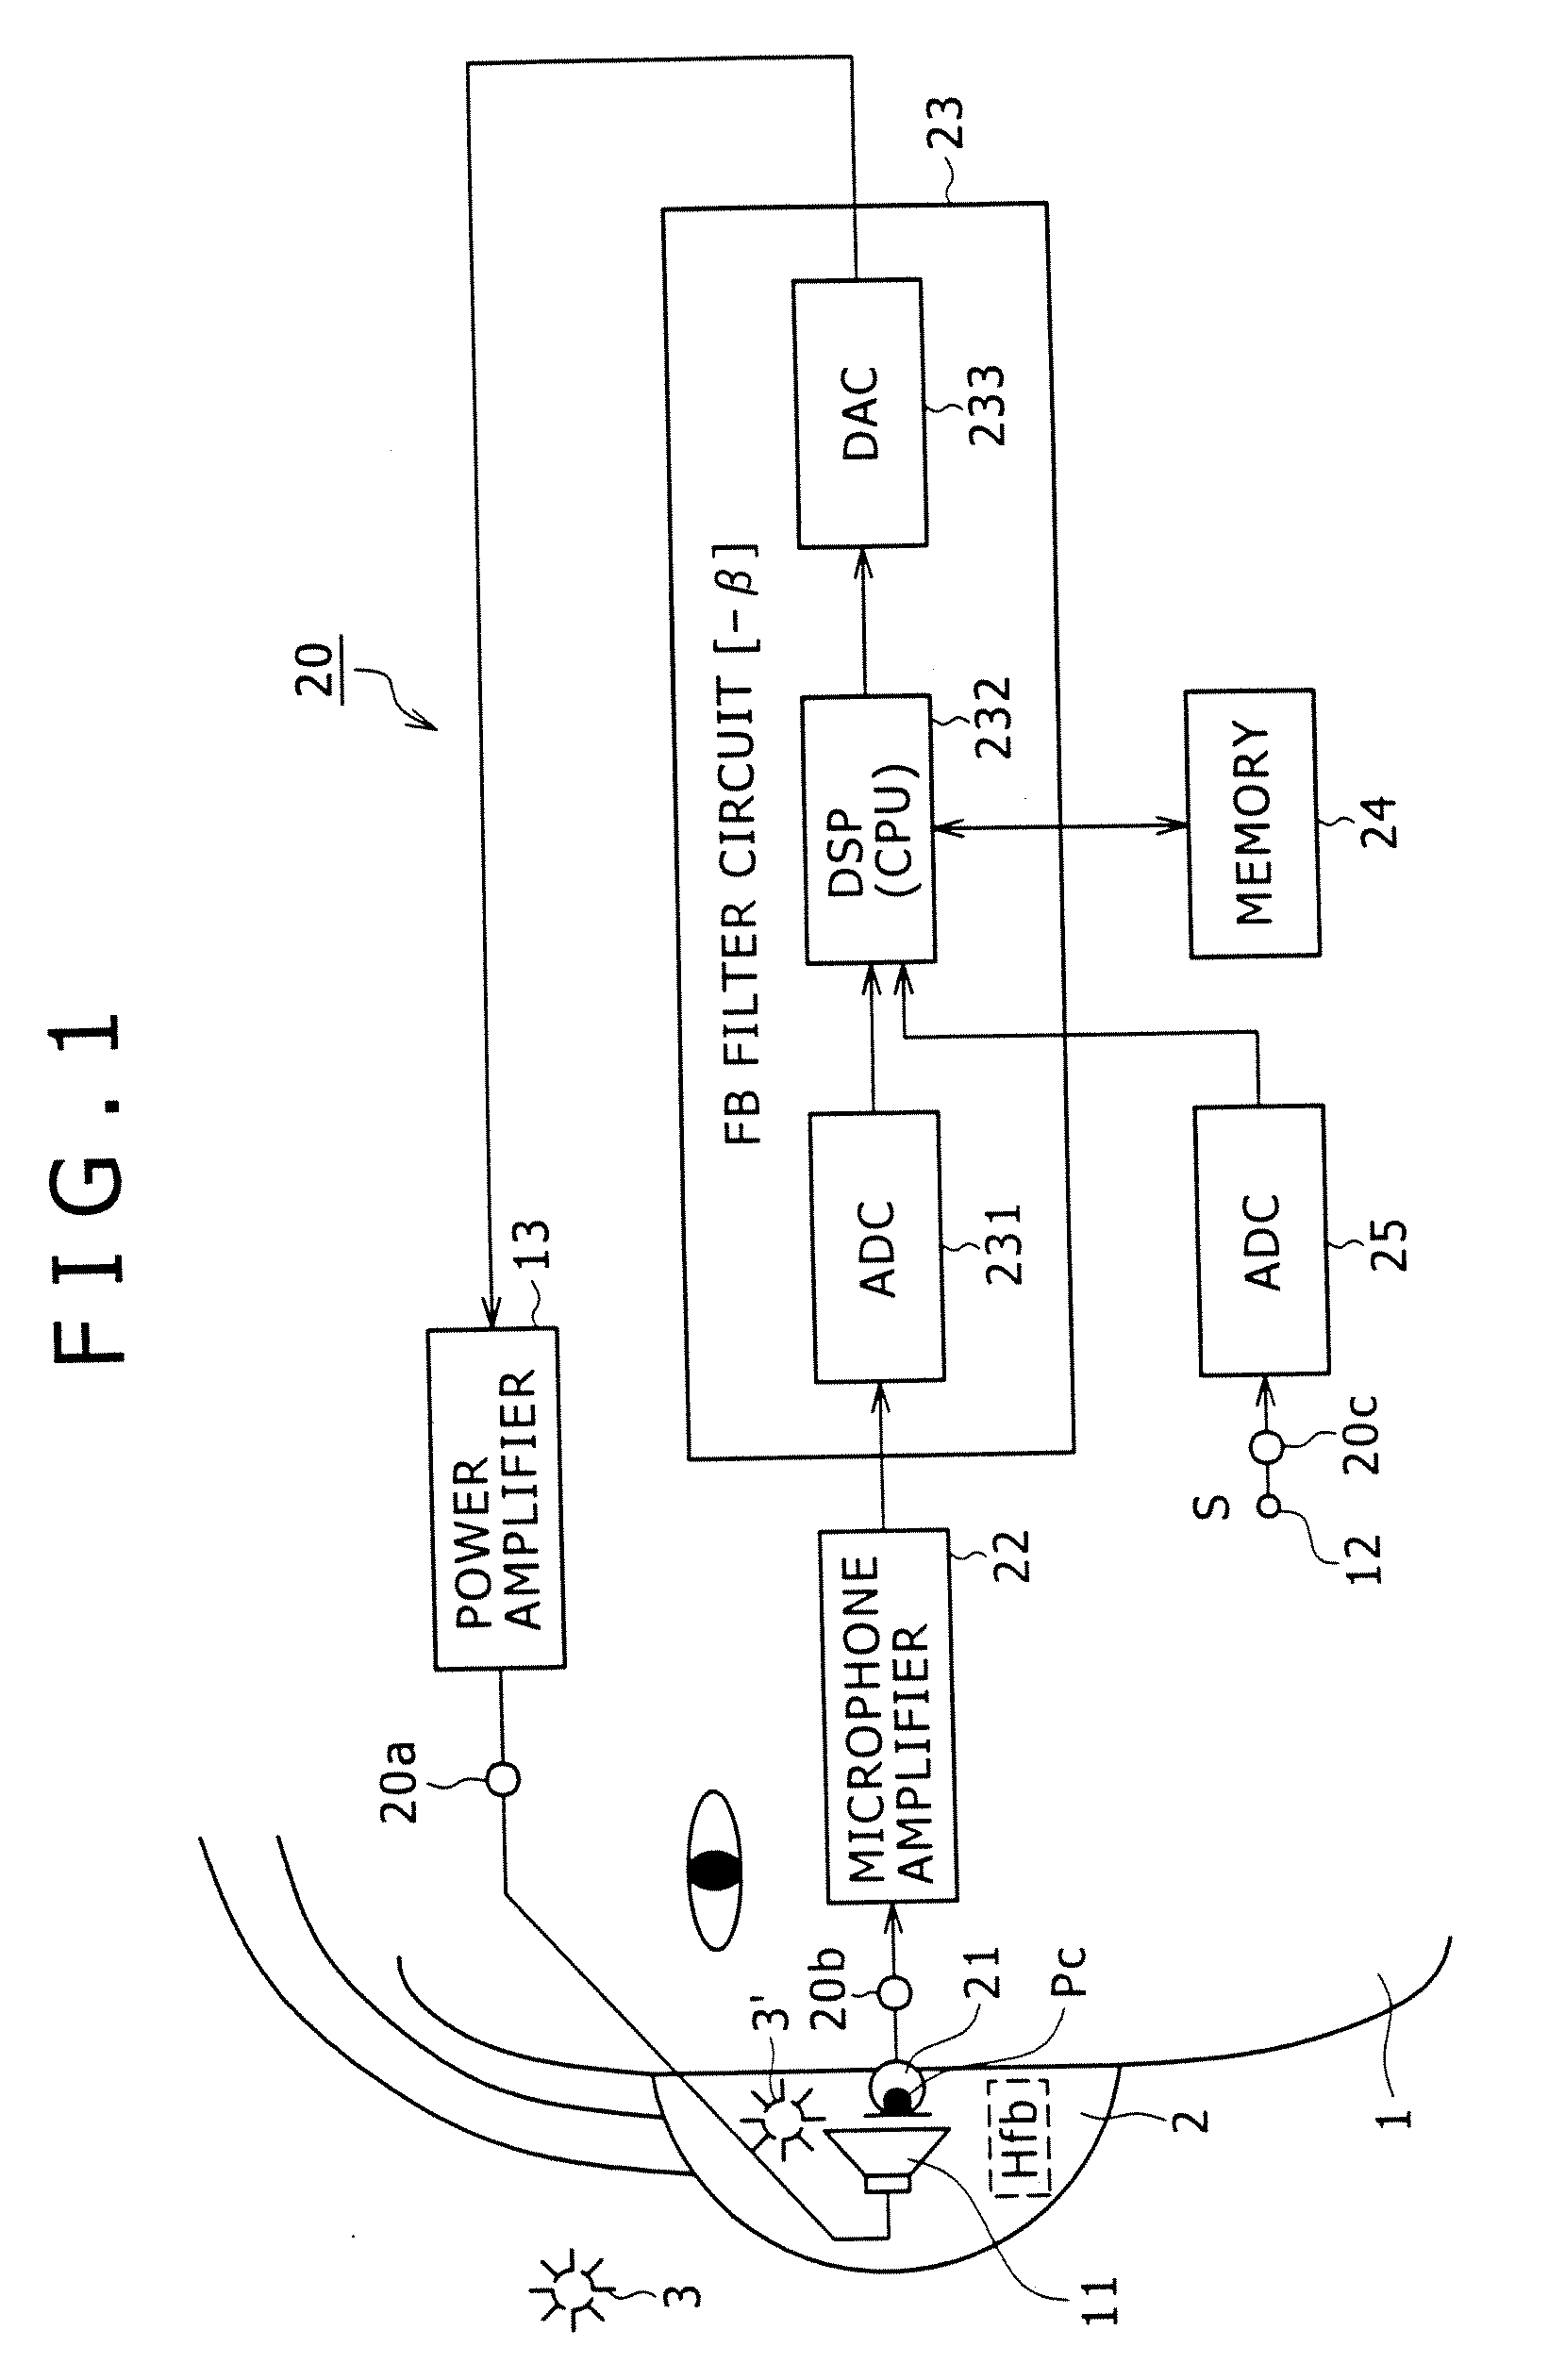 Sound outputting apparatus, sound outputting method, sound output processing program and sound outputting system